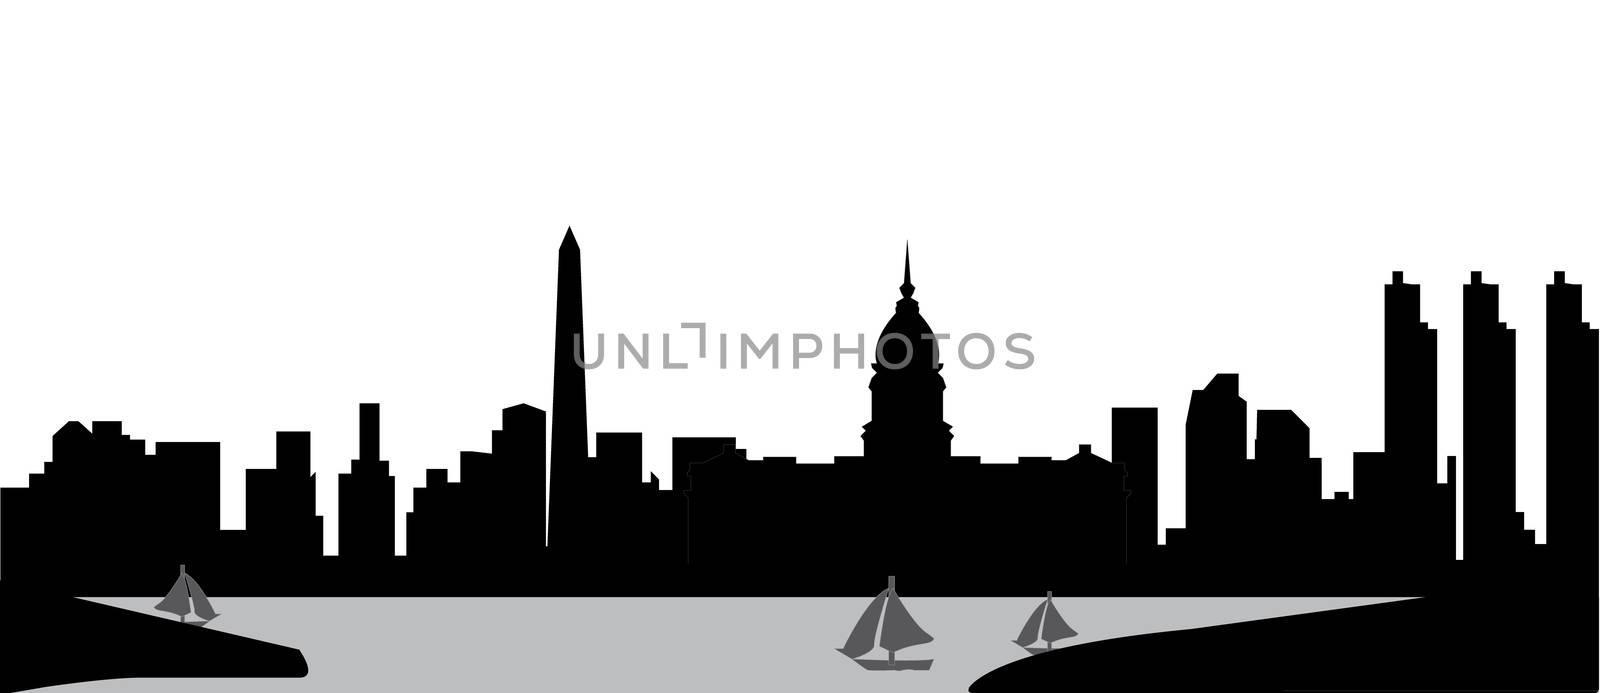 buenos aires skyline by compuinfoto